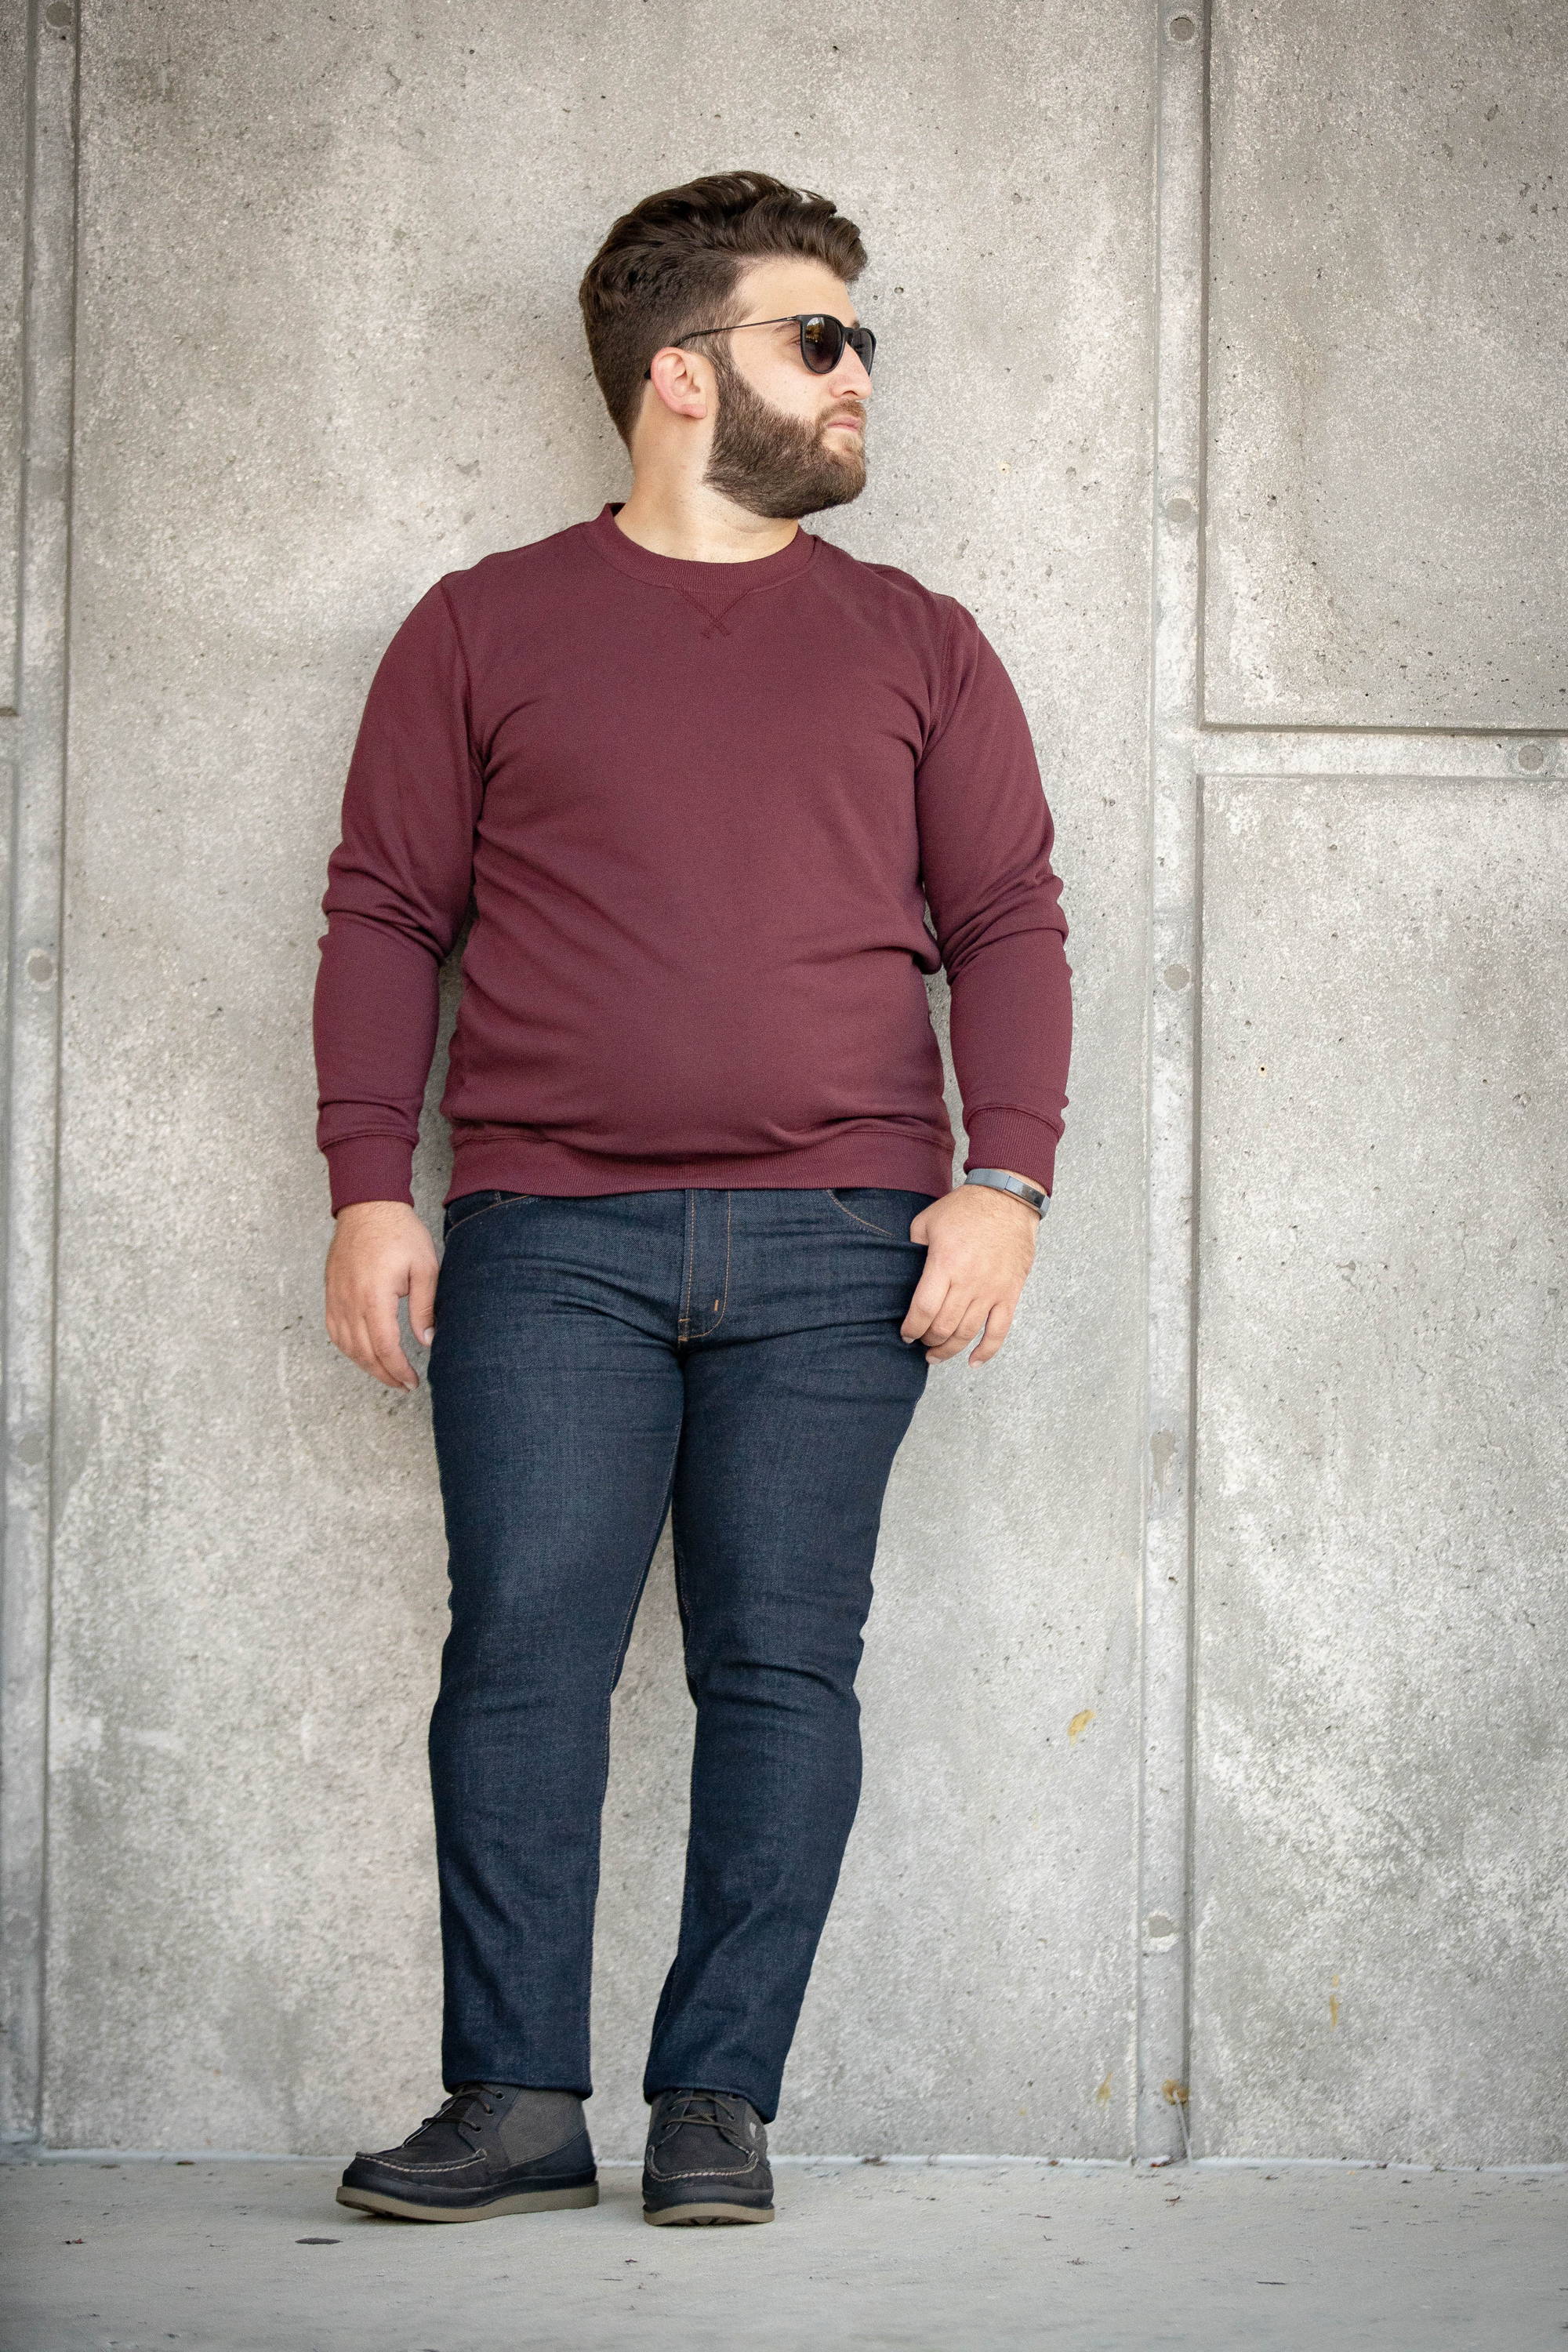 The Best Short & Fat Men's Clothes from Under 510 – Under 5'10